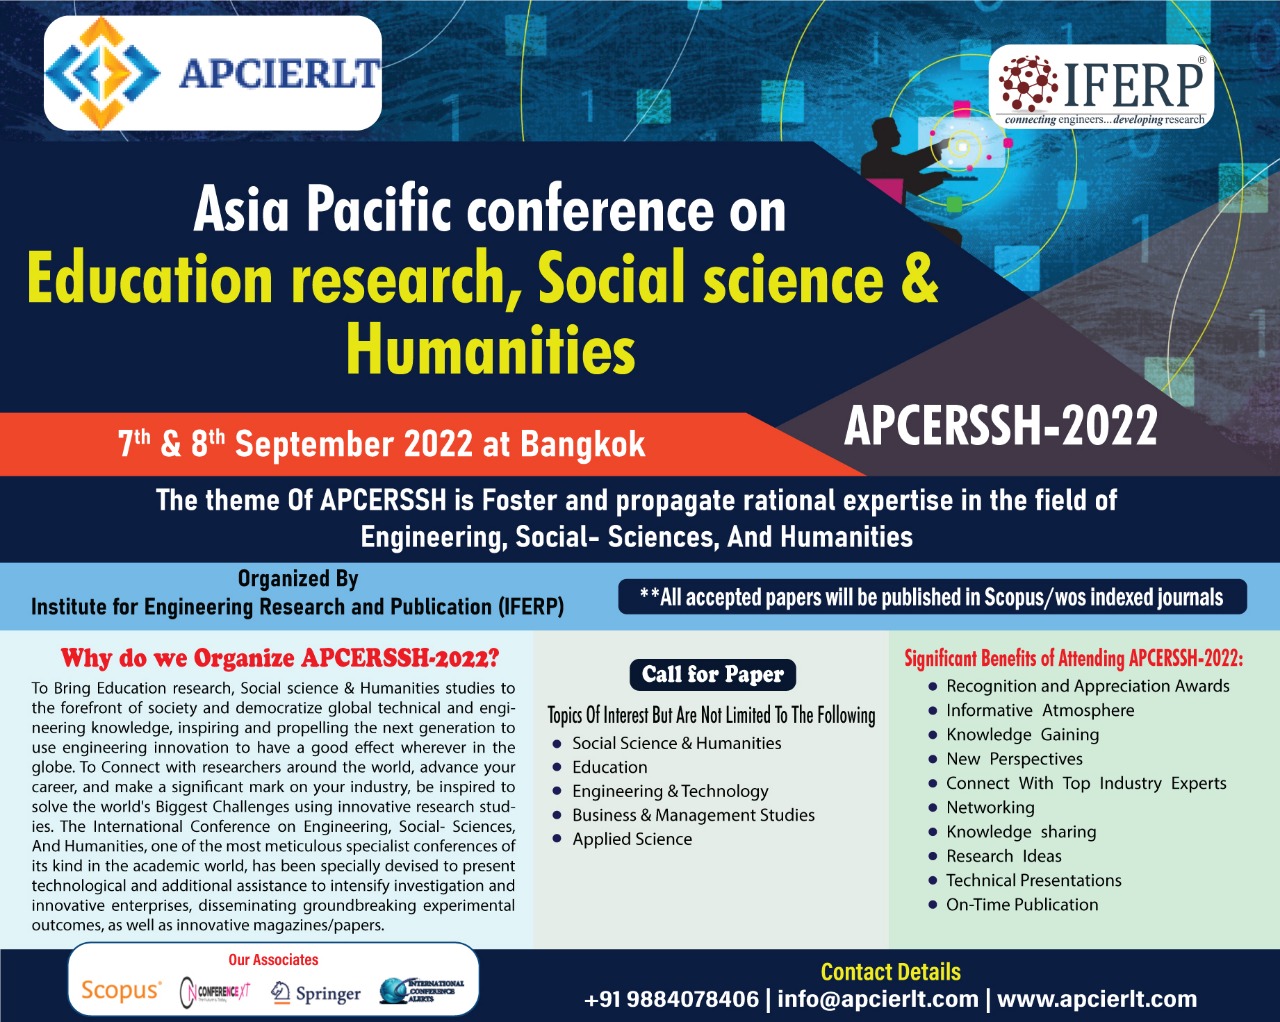 Asia Pacific Conference on Education Research ,Social Science & Humanities (APCERSSH-2022), Bangkok, Thailand